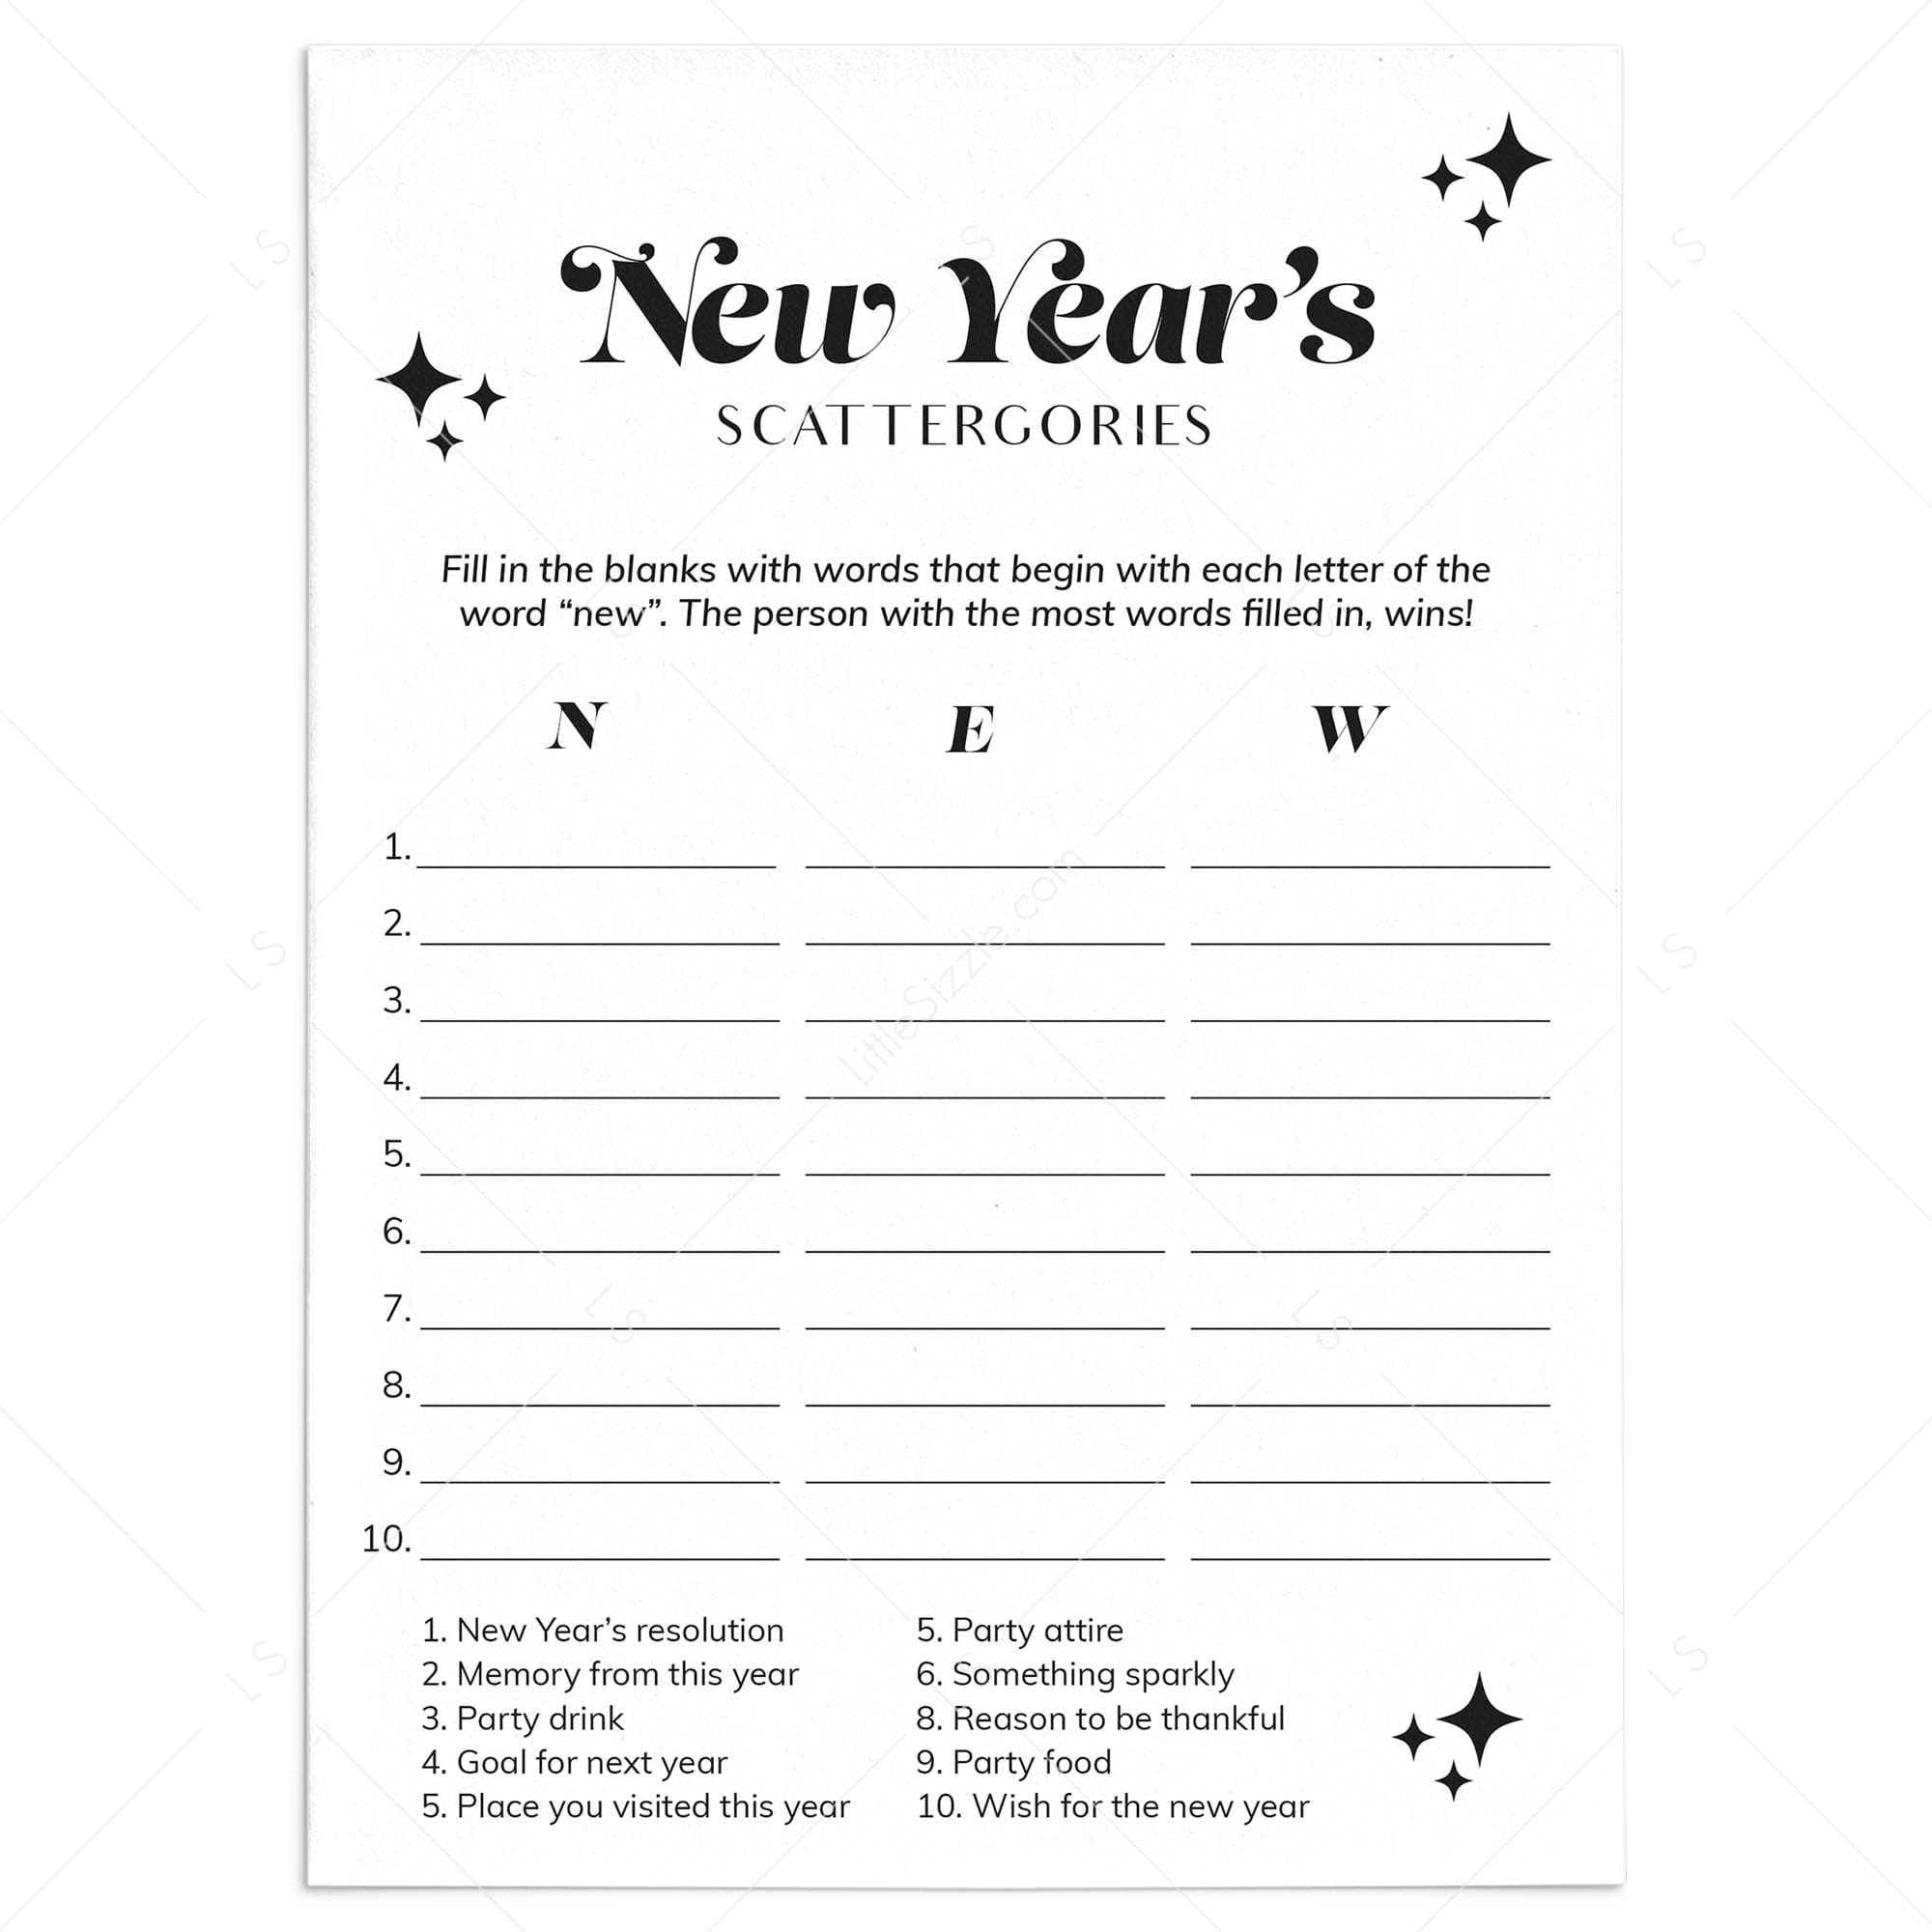 Black & White New Year's Game Scattergories Printable by LittleSizzle